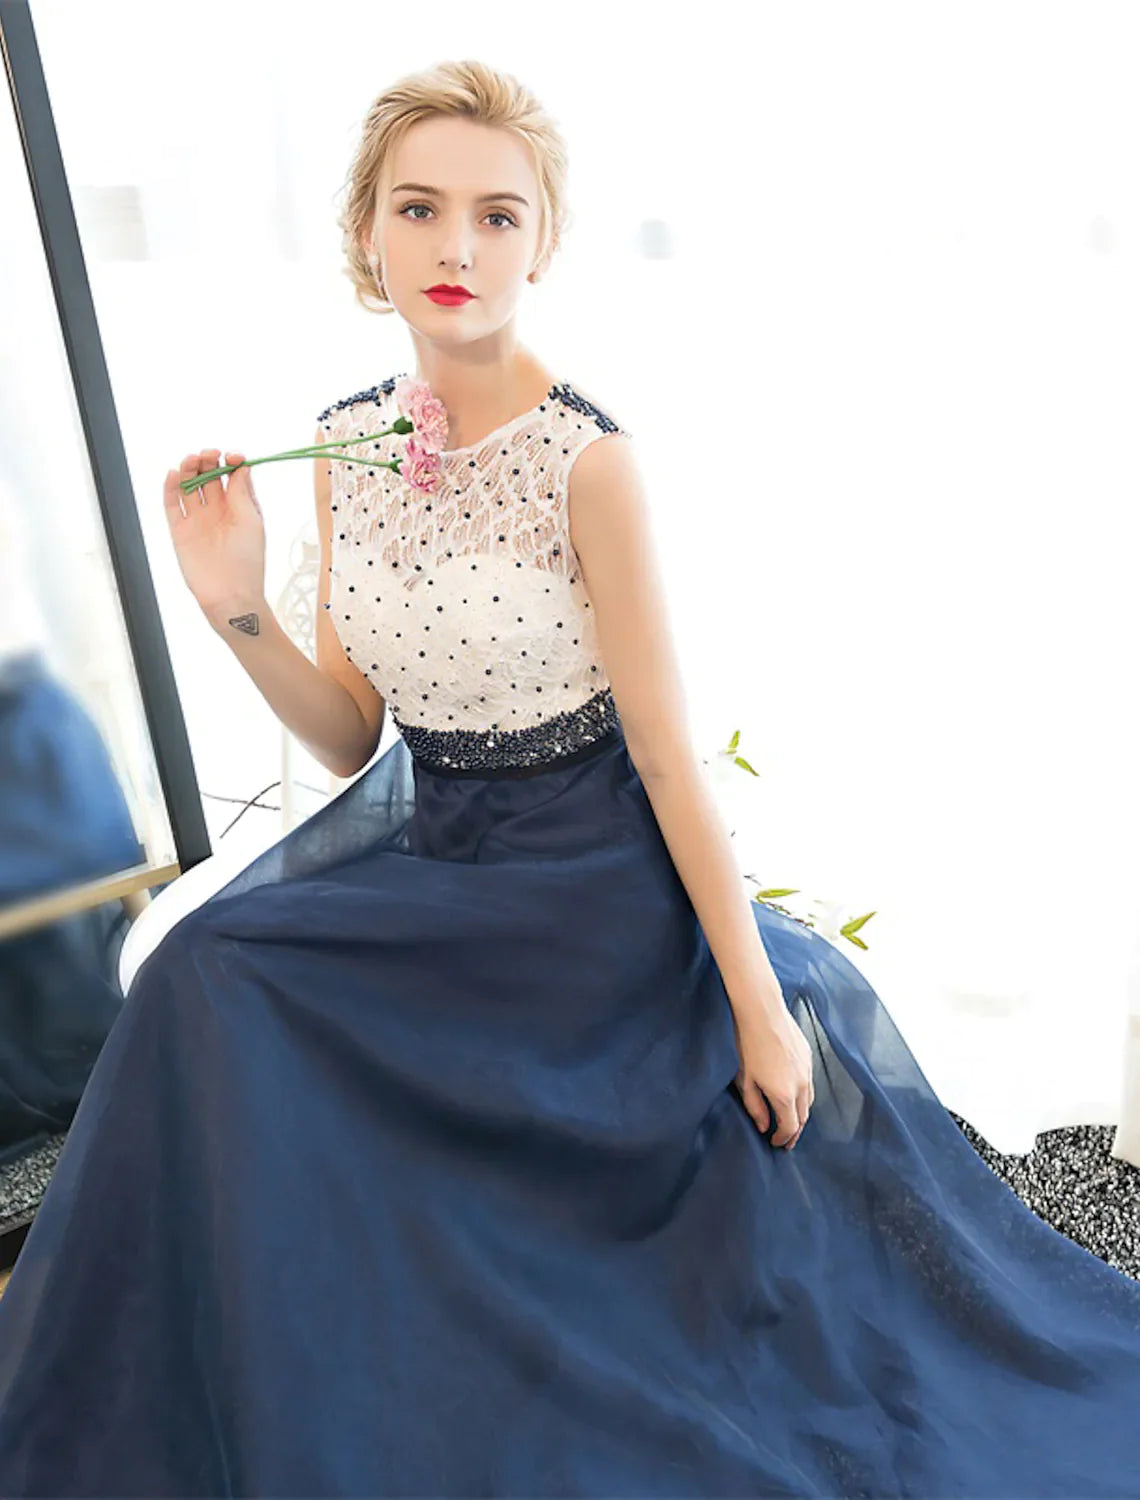 A-Line Elegant Beaded Sequin Prom Formal Evening Dress Sleeveless Floor Length Tulle Over Lace Beading